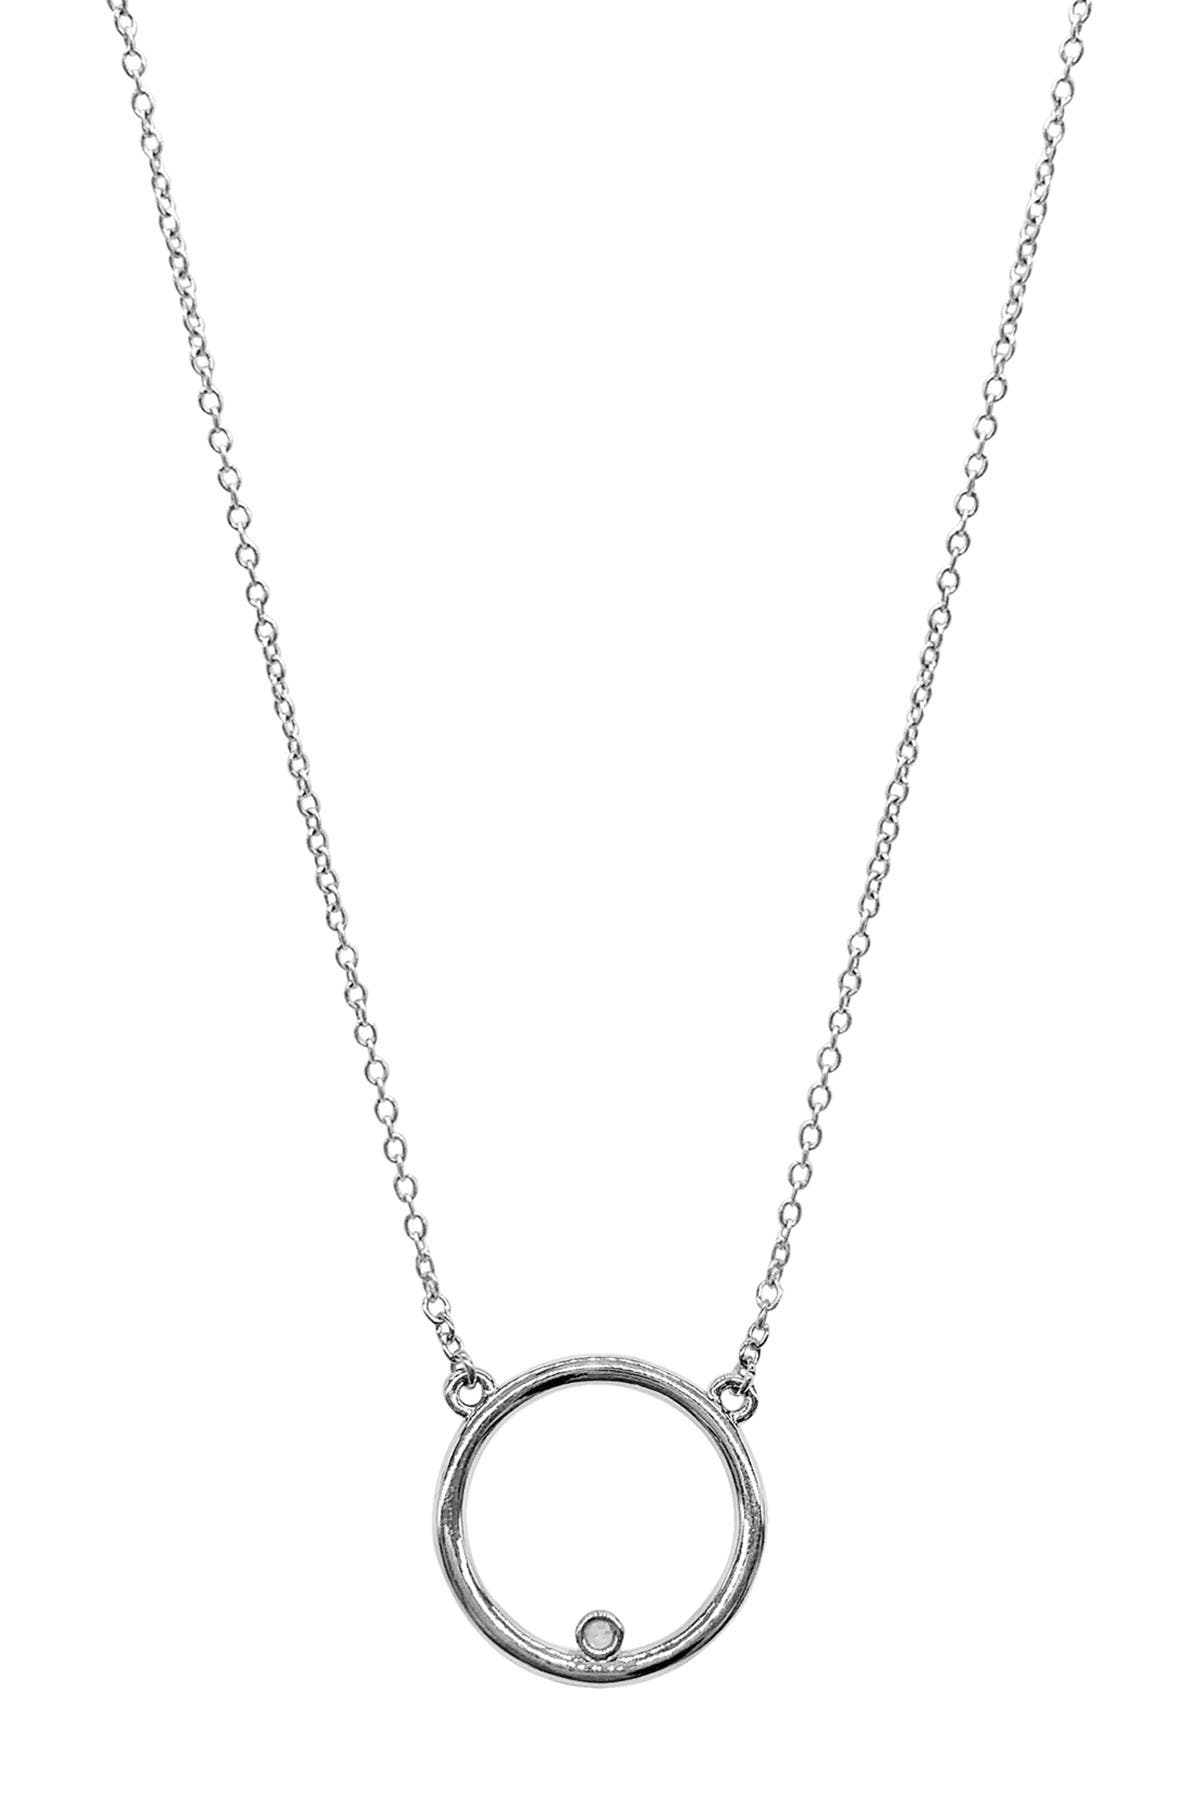 Adornia White Rhodium Plated Floating Diamond Open Circle Pendant Necklace In Silver-tone